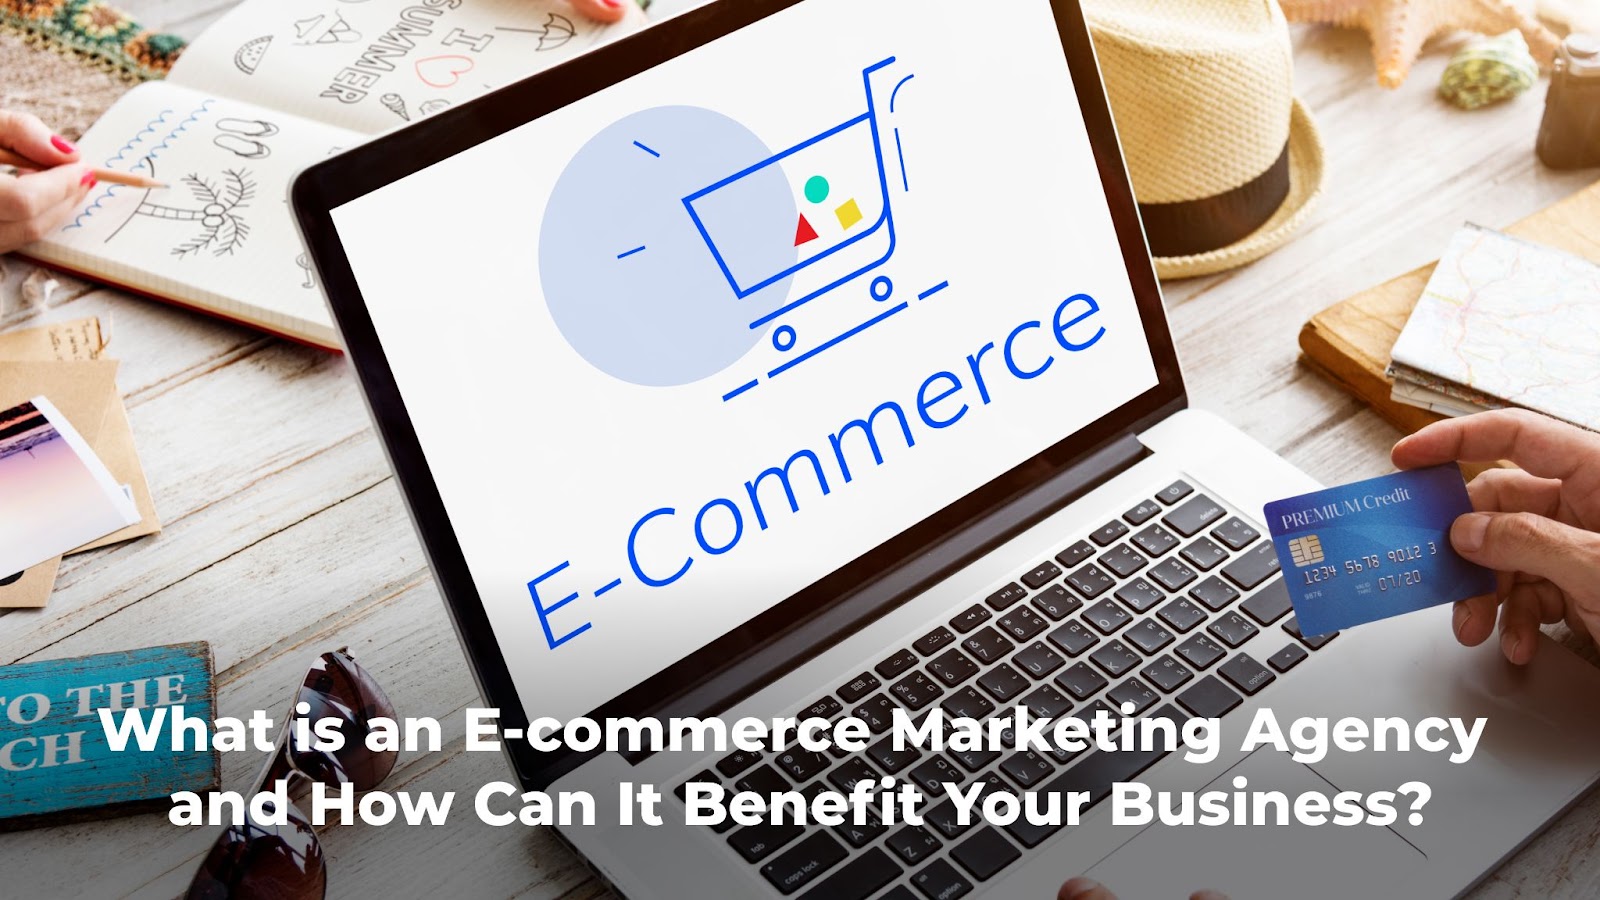 What is an E-commerce Marketing Agency and How Can It Benefit Your Business?